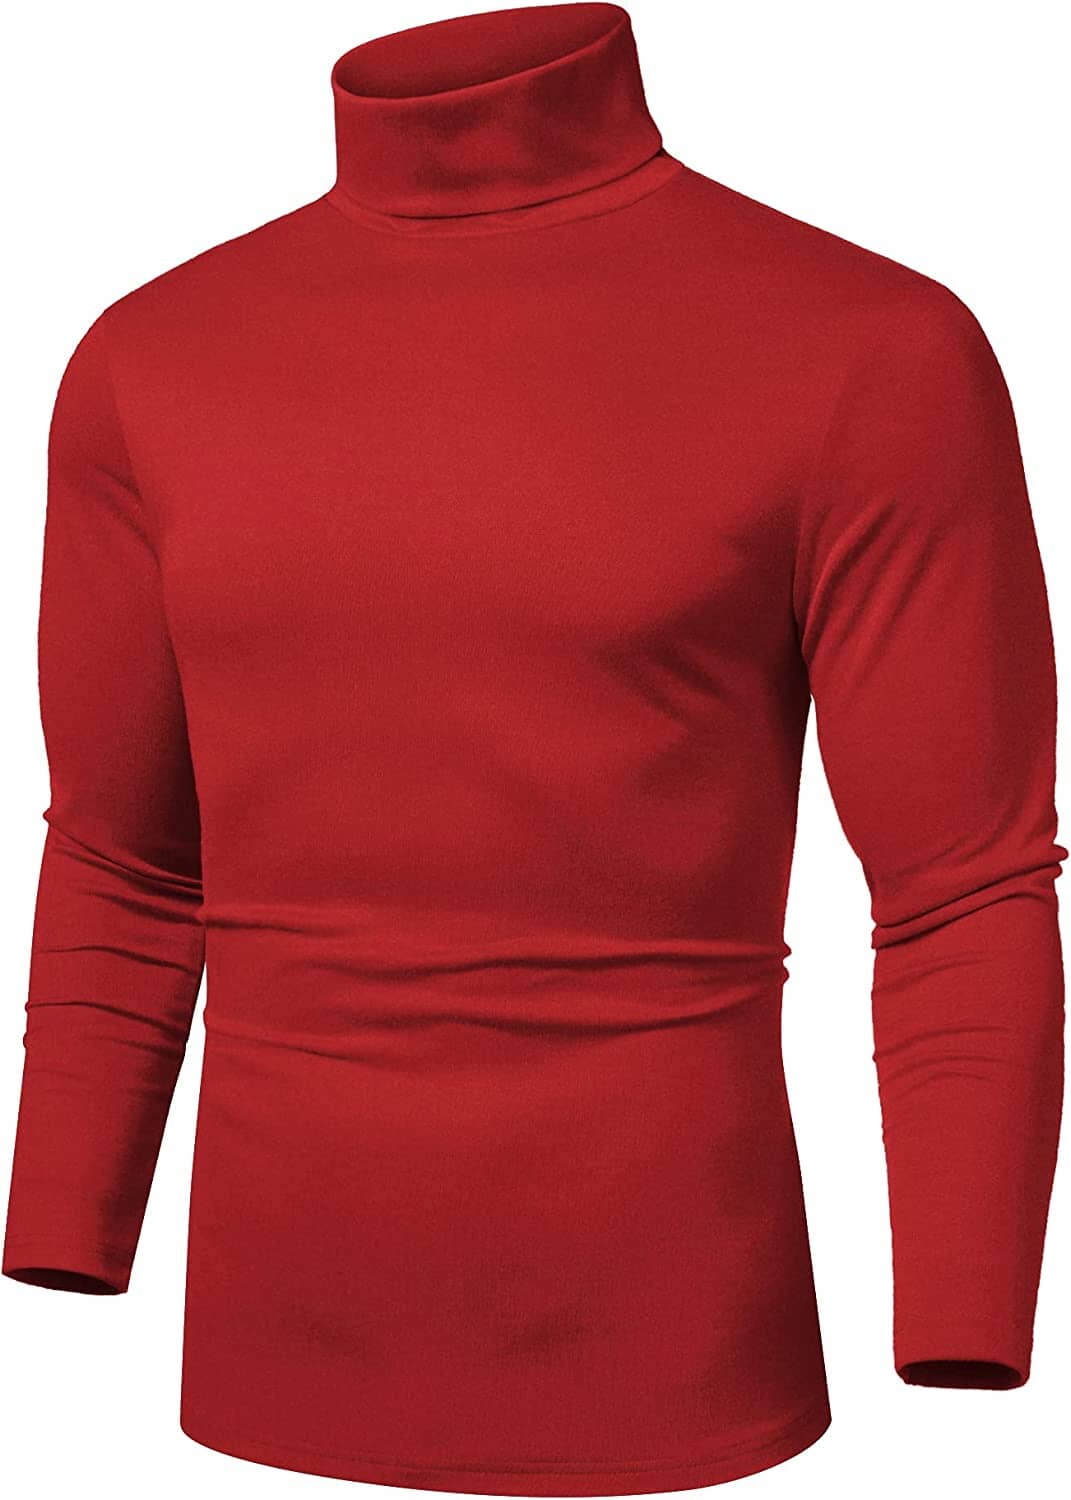 Slim Fit Basic Turtleneck Knitted Pullover Sweaters (US Only) Sweaters COOFANDY Store Red S 